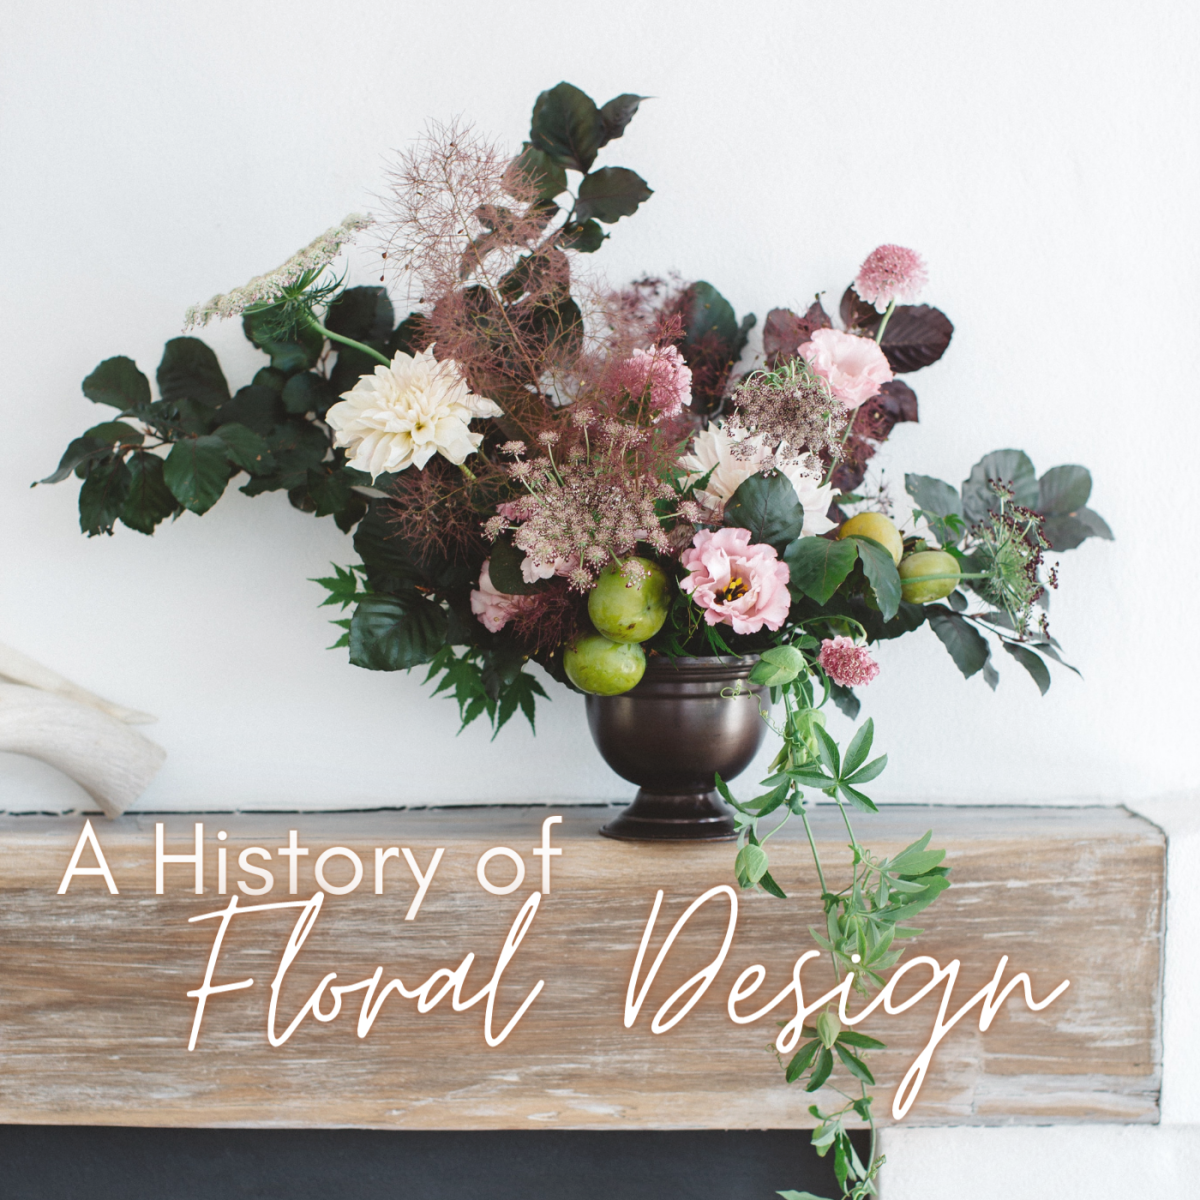 Floral design dates back millennia, from the people of ancient Egypt to eastern Asia. 